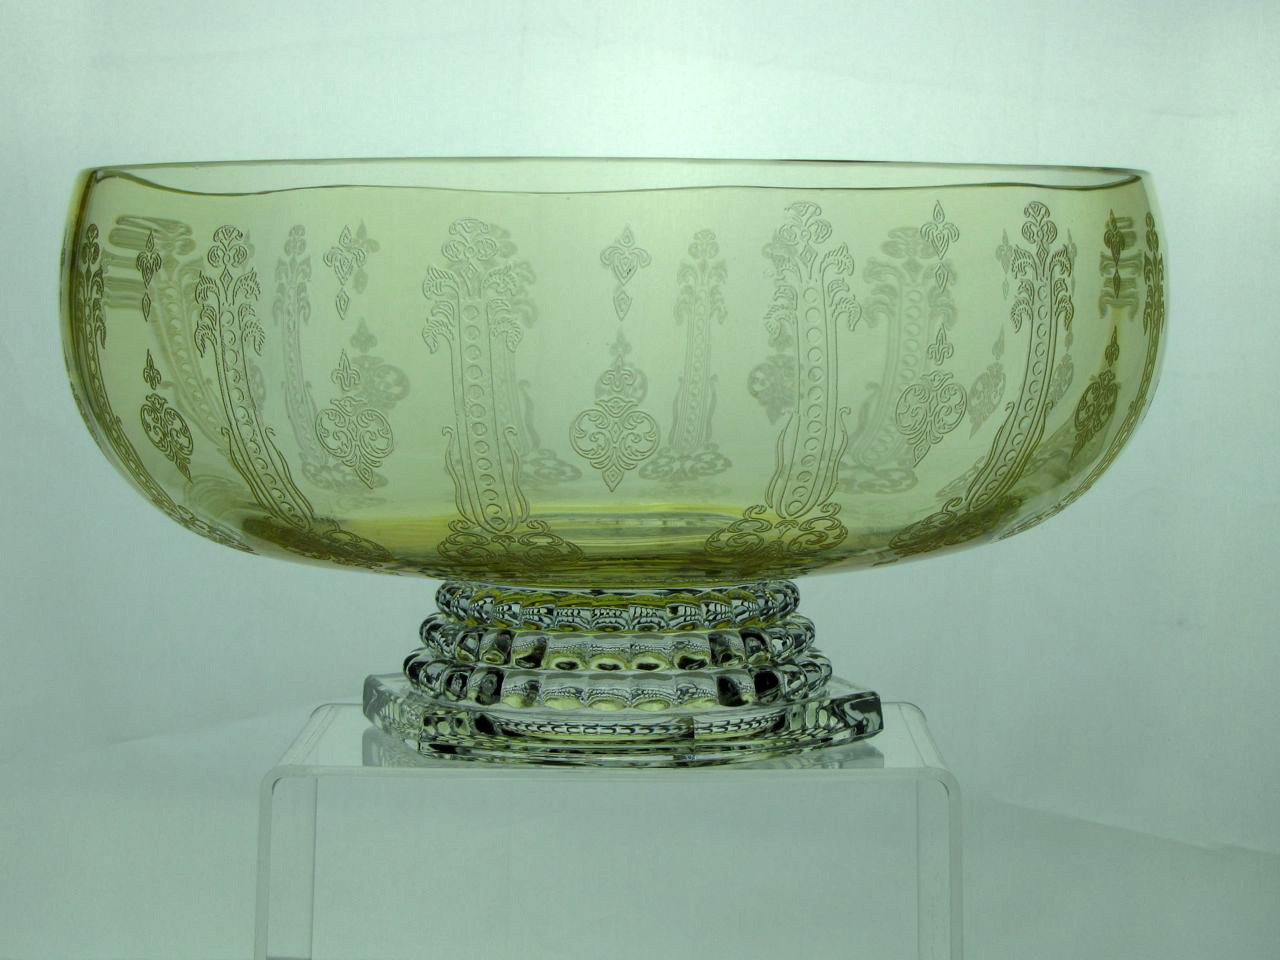 Heisey #3397 Gascony 10 inch Footed Floral Bowl, Sahara with #453 Inca Etch